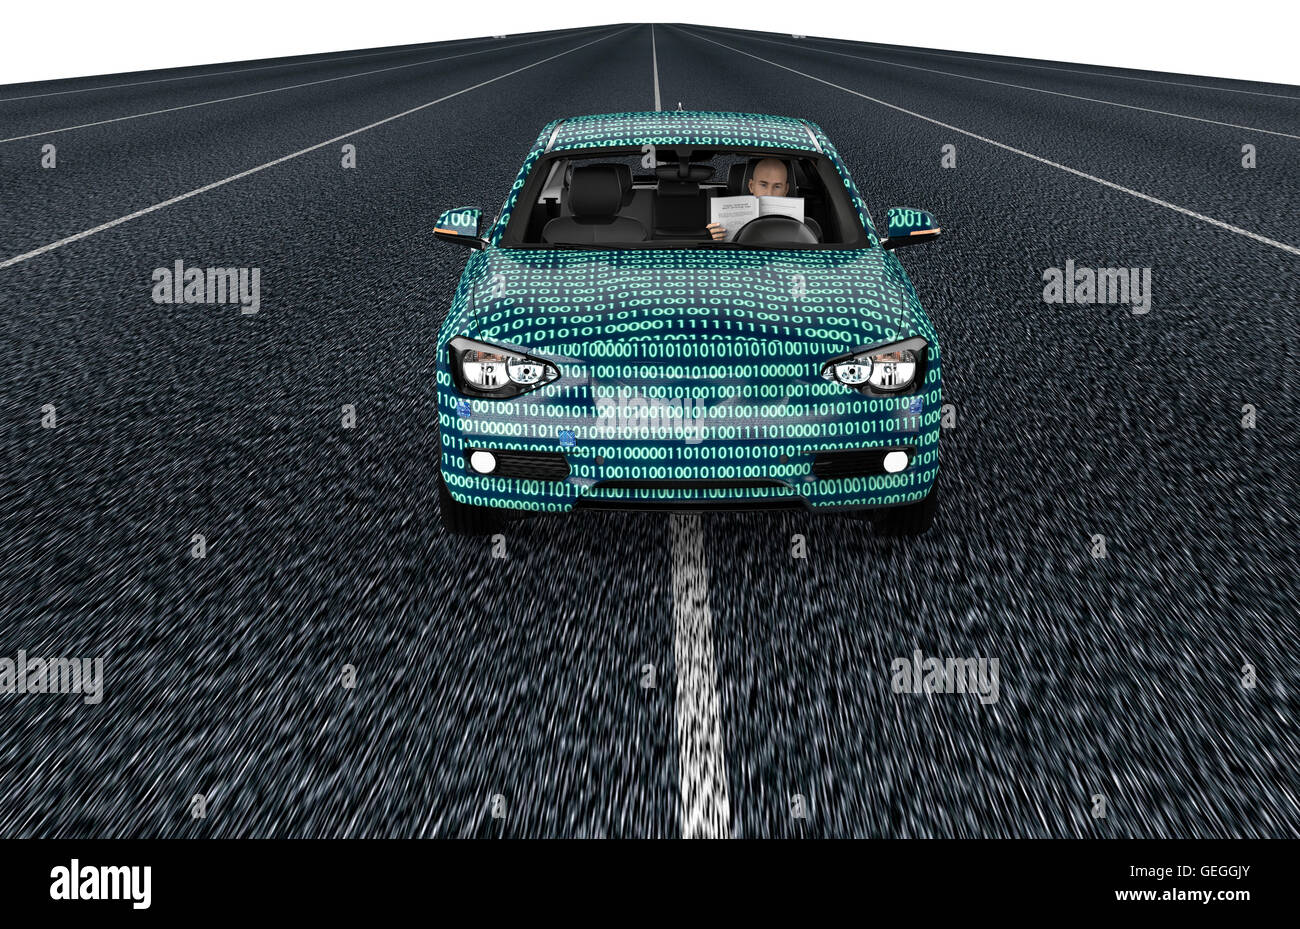 self driving electronic computer car on road, 3d illustration Stock Photo